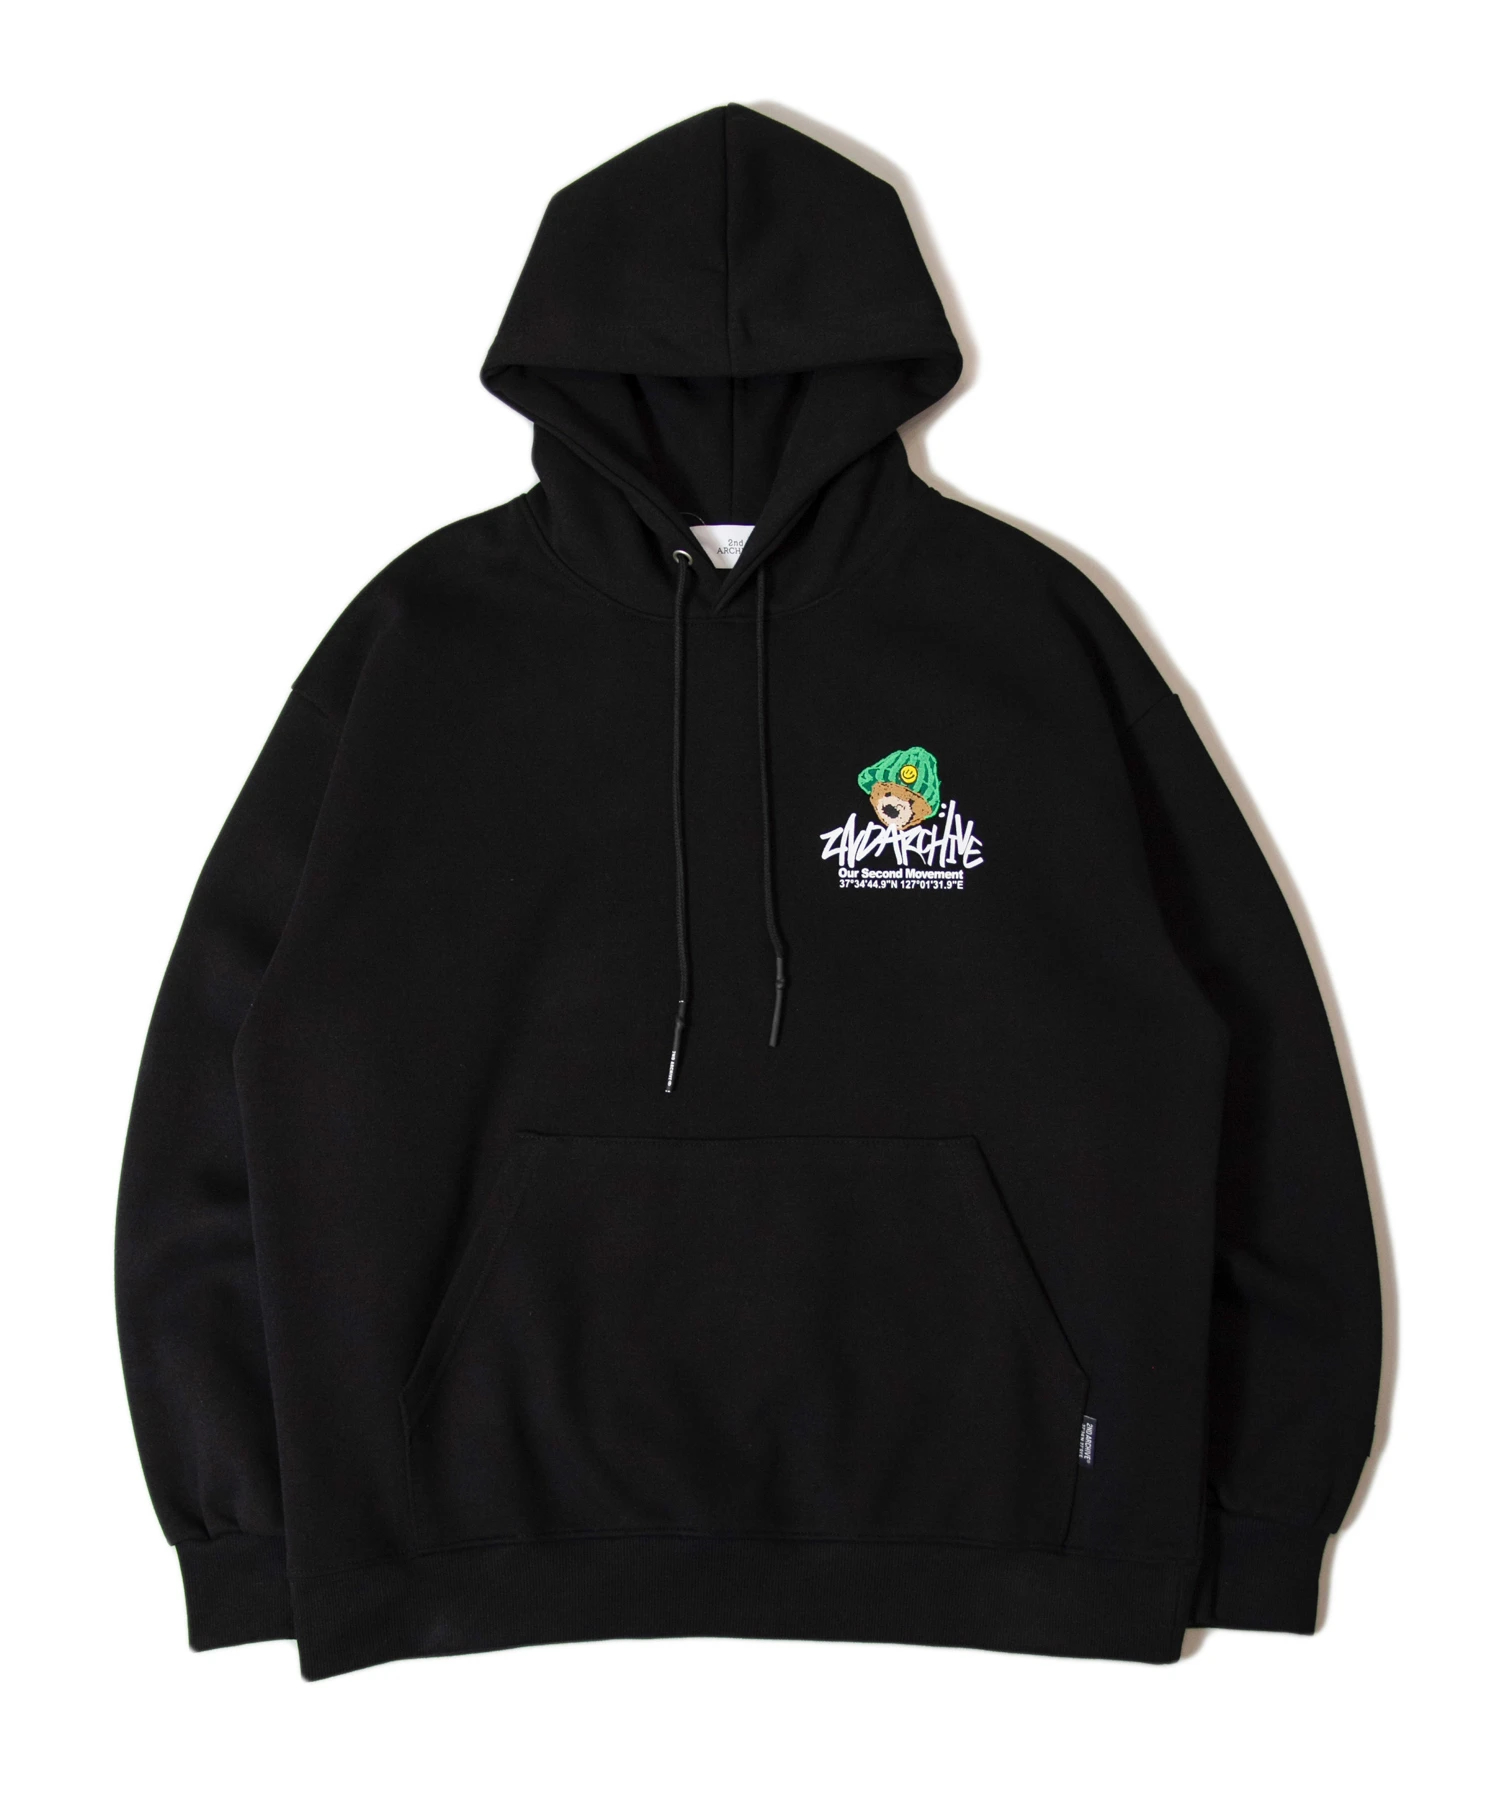 00s G.O.A Archive hoodie ゴア アーカイブ パーカー ゴア ...